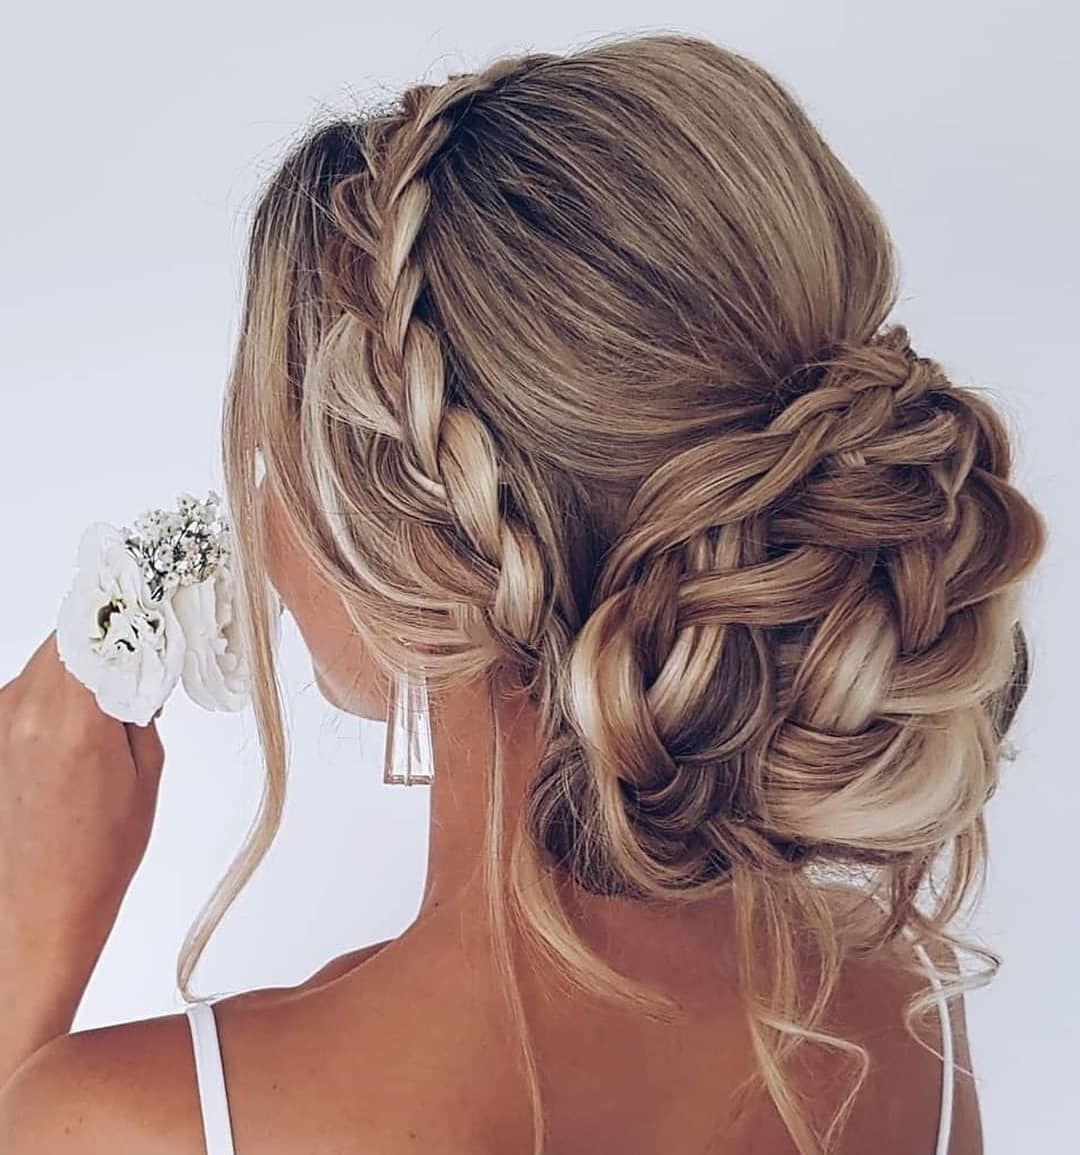 25 Updo Wedding Hairstyles for Long Hair -   15 hair Updos long
 ideas